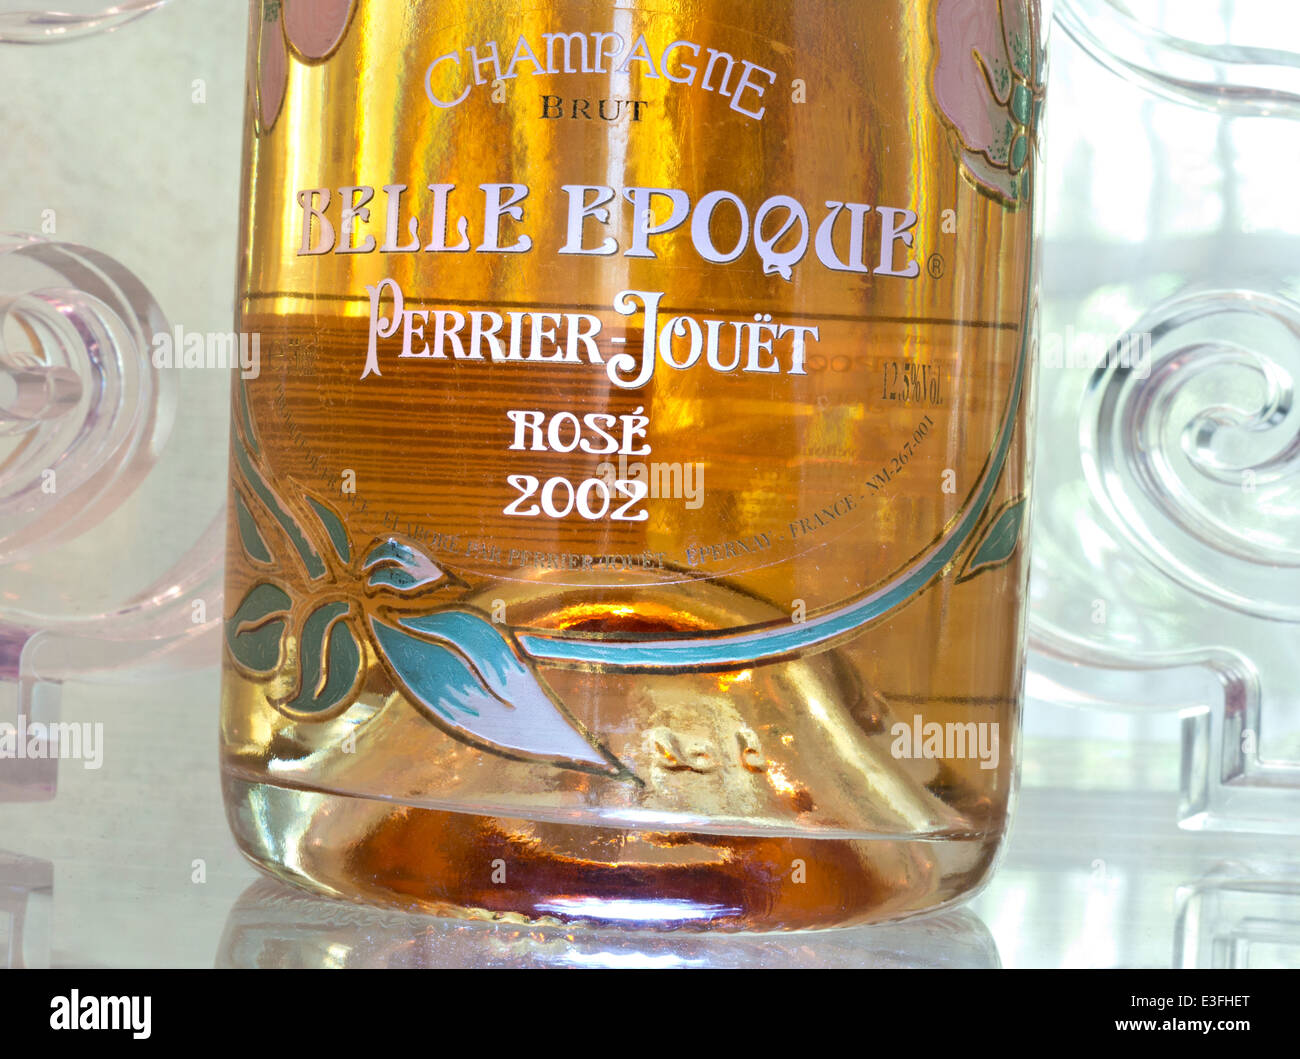 Close view on Perrier Jouet cuvee Belle Epoque rose fine luxury champagne bottle in fine dining bar situation Stock Photo